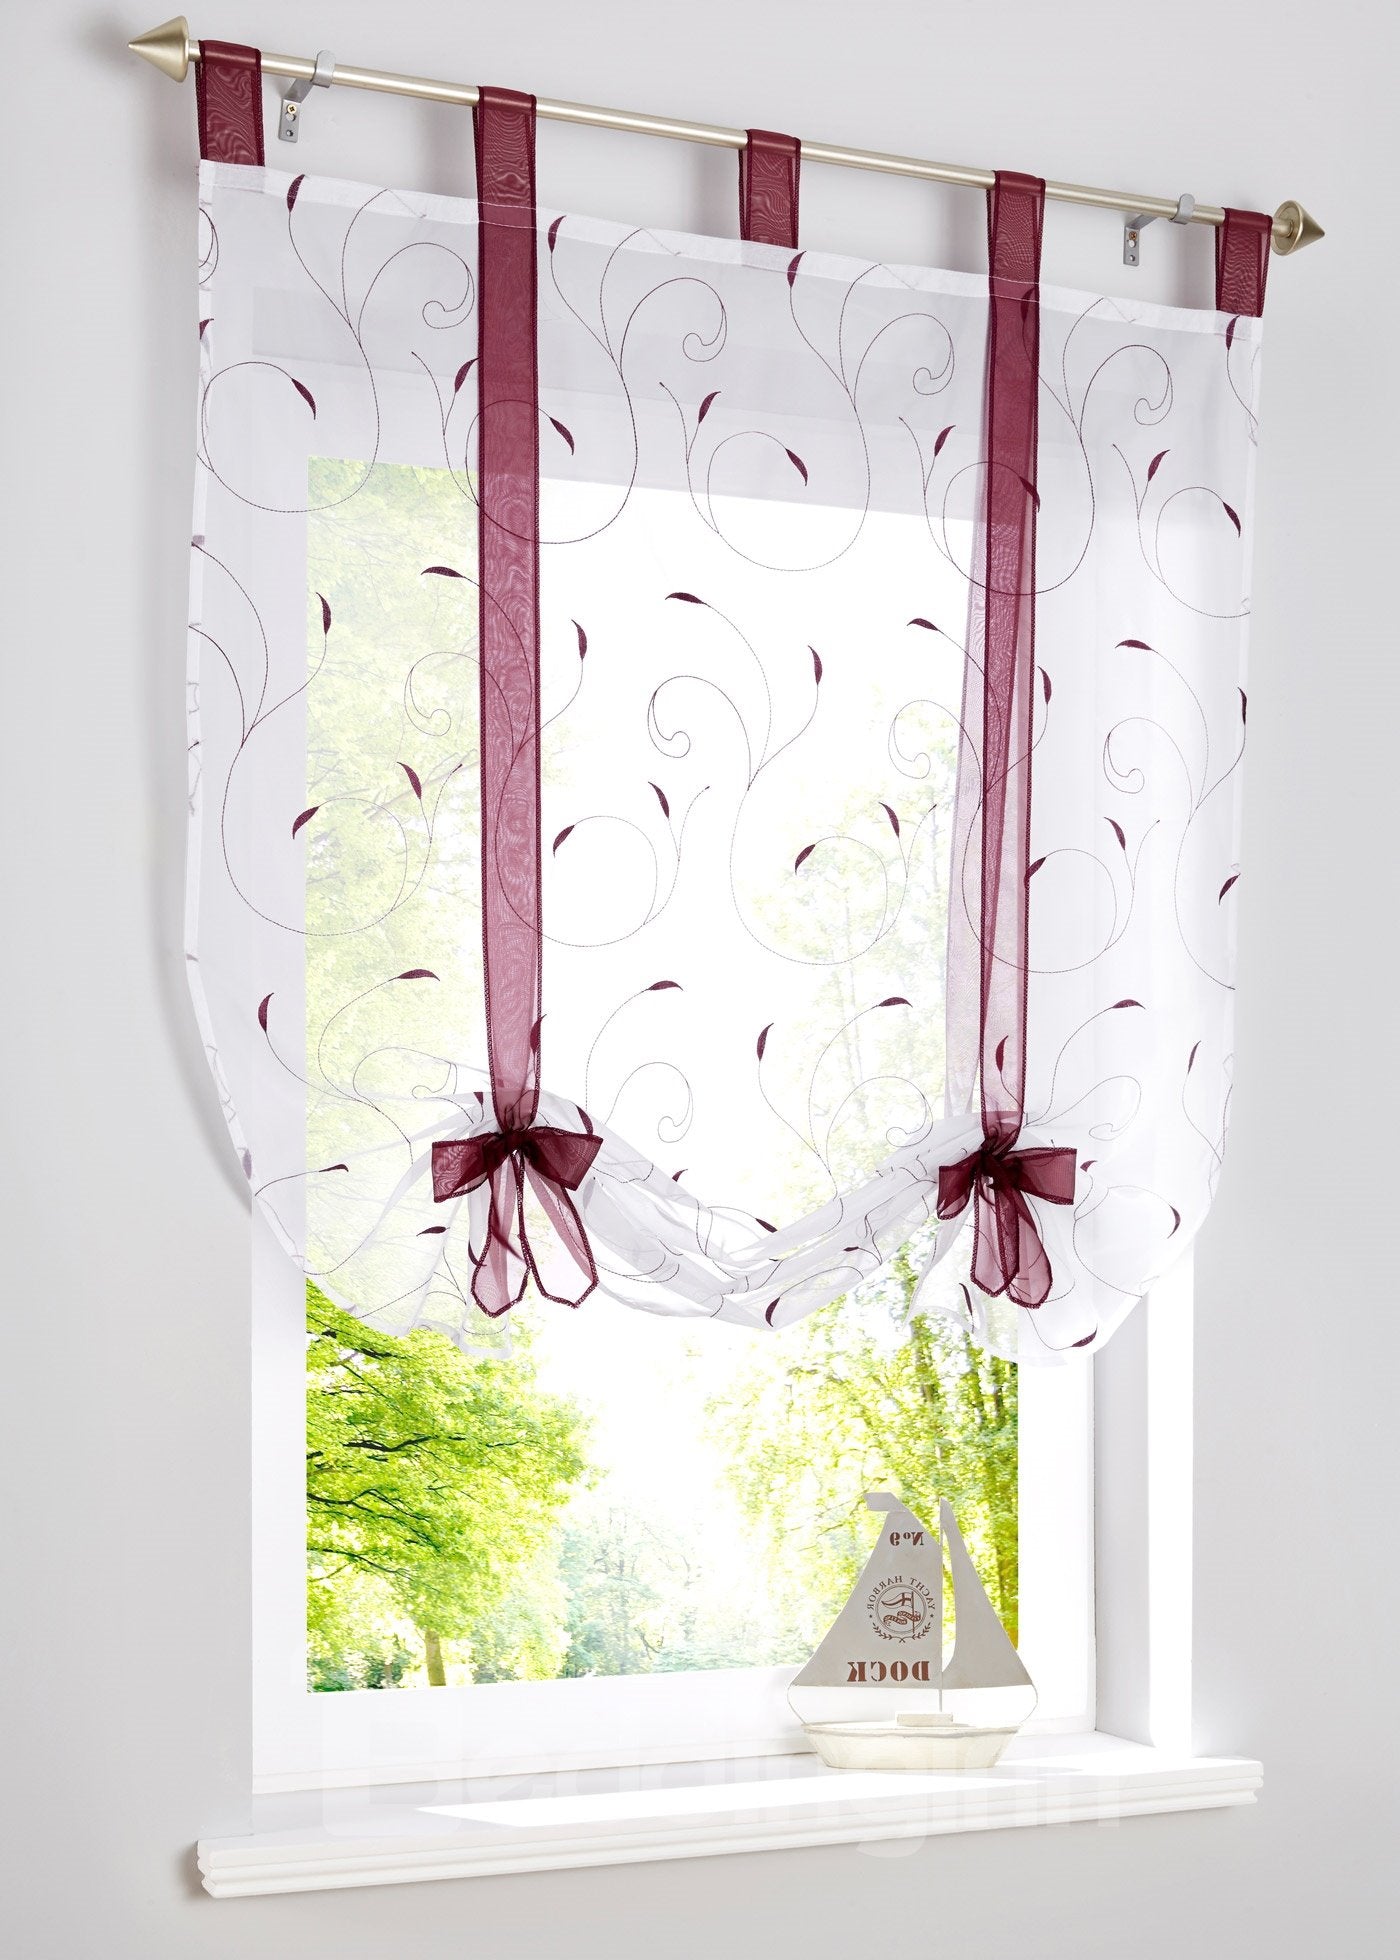 Printed-Line Shade Pastoral Style Window Decor for Kitchen